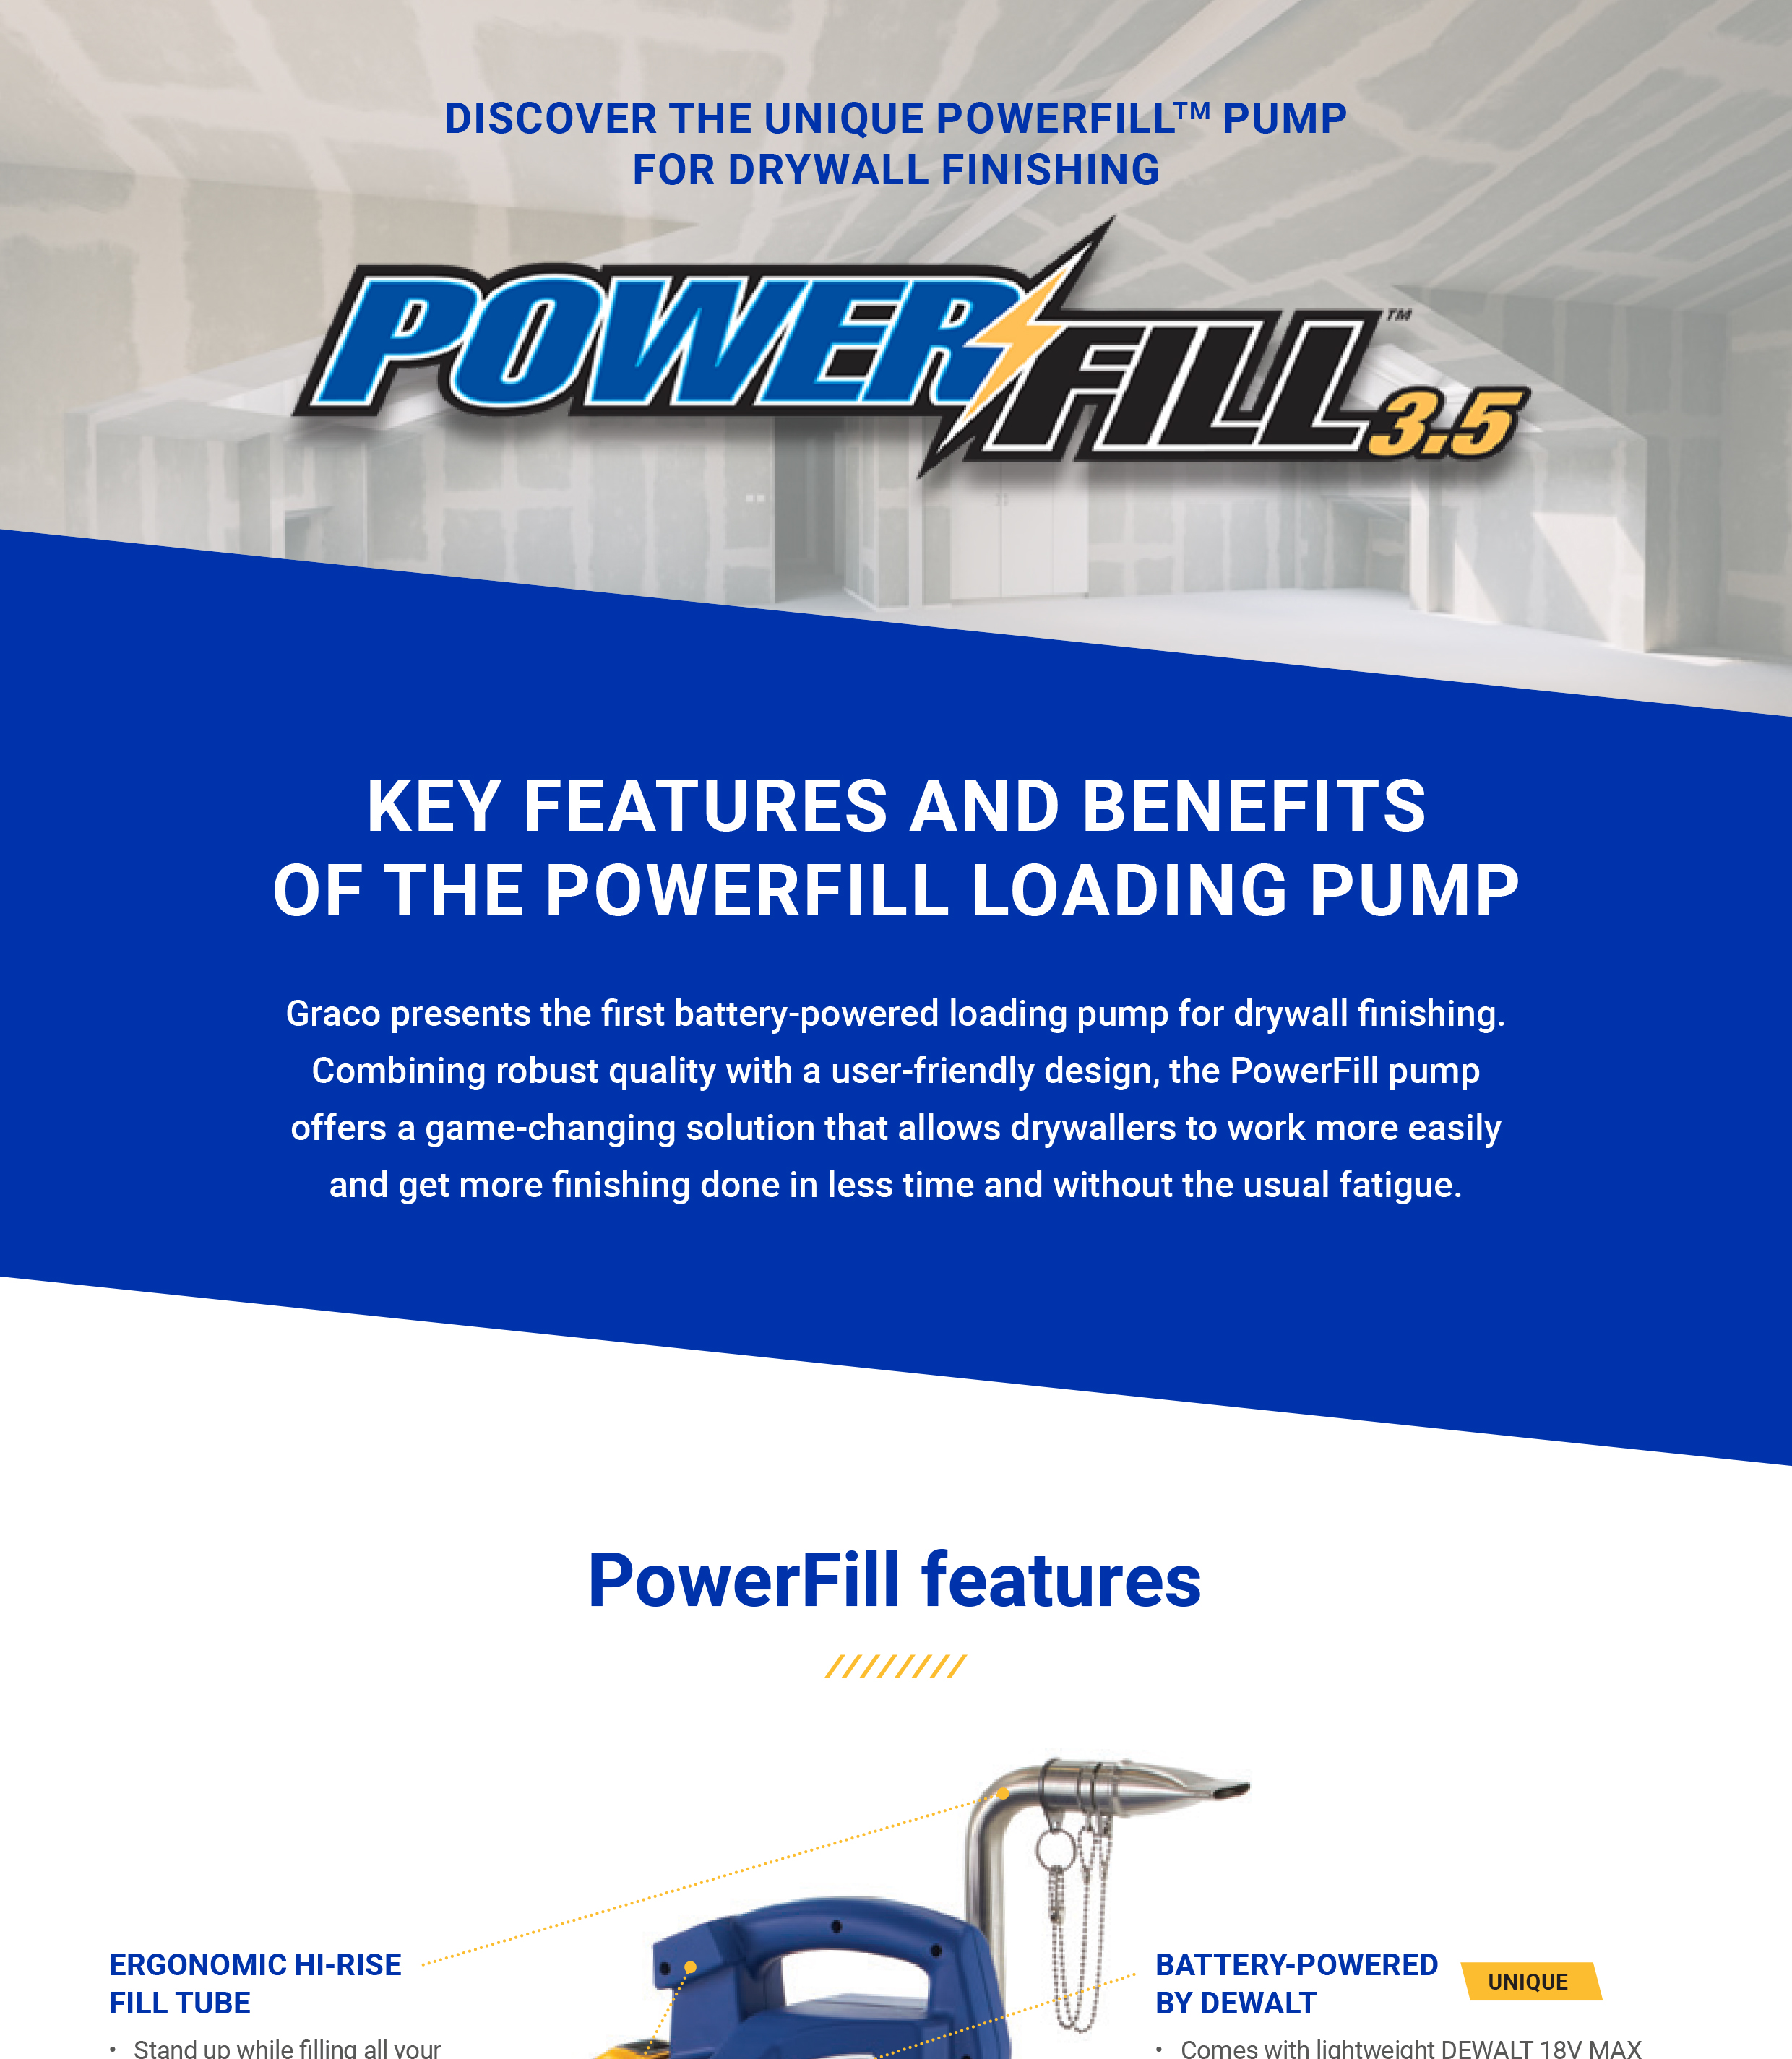 Infographic_PowerFill_Features-Benefits_image_EN_A.jpg